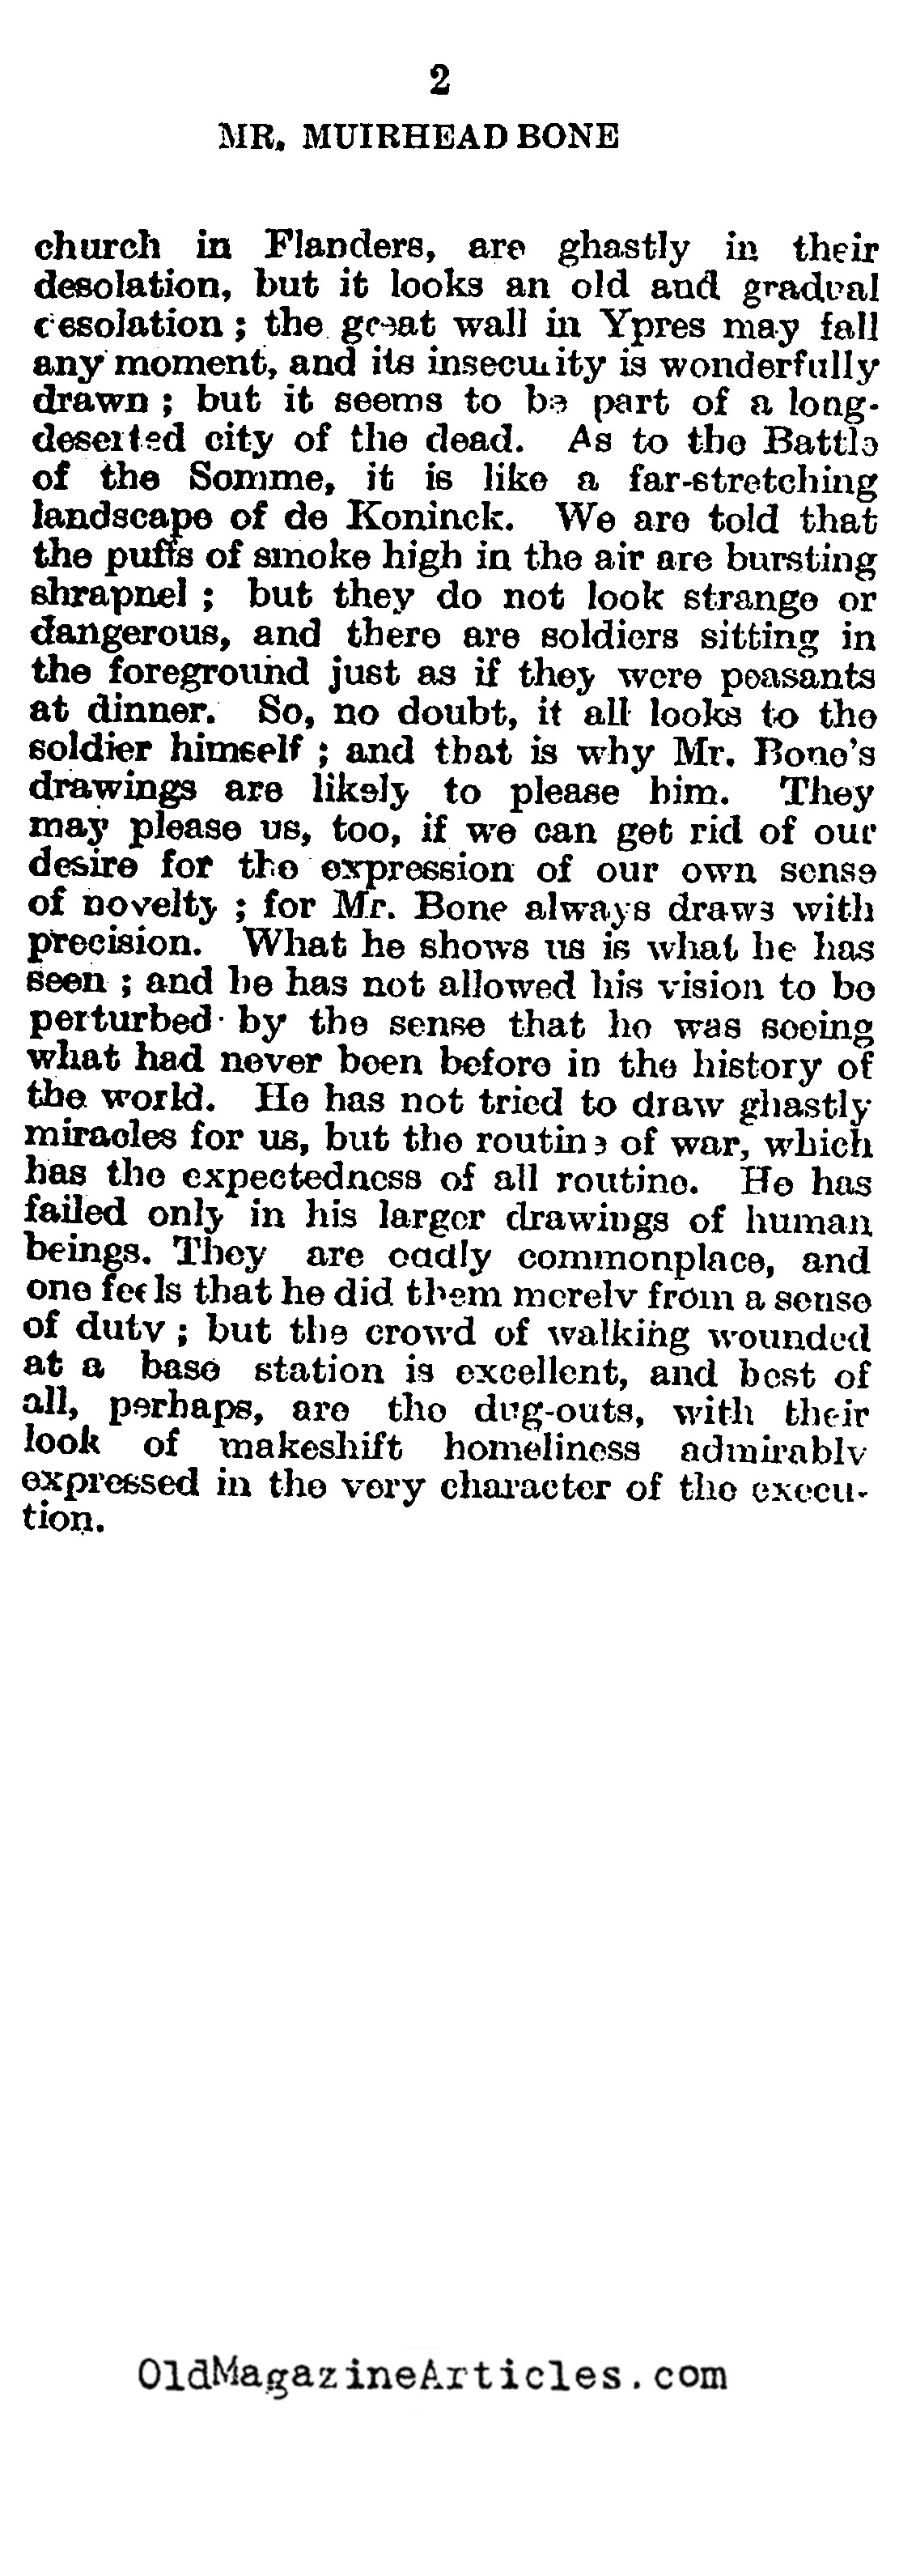 Muirhead Bone at the Front (Times Literary Supplement, 1918)